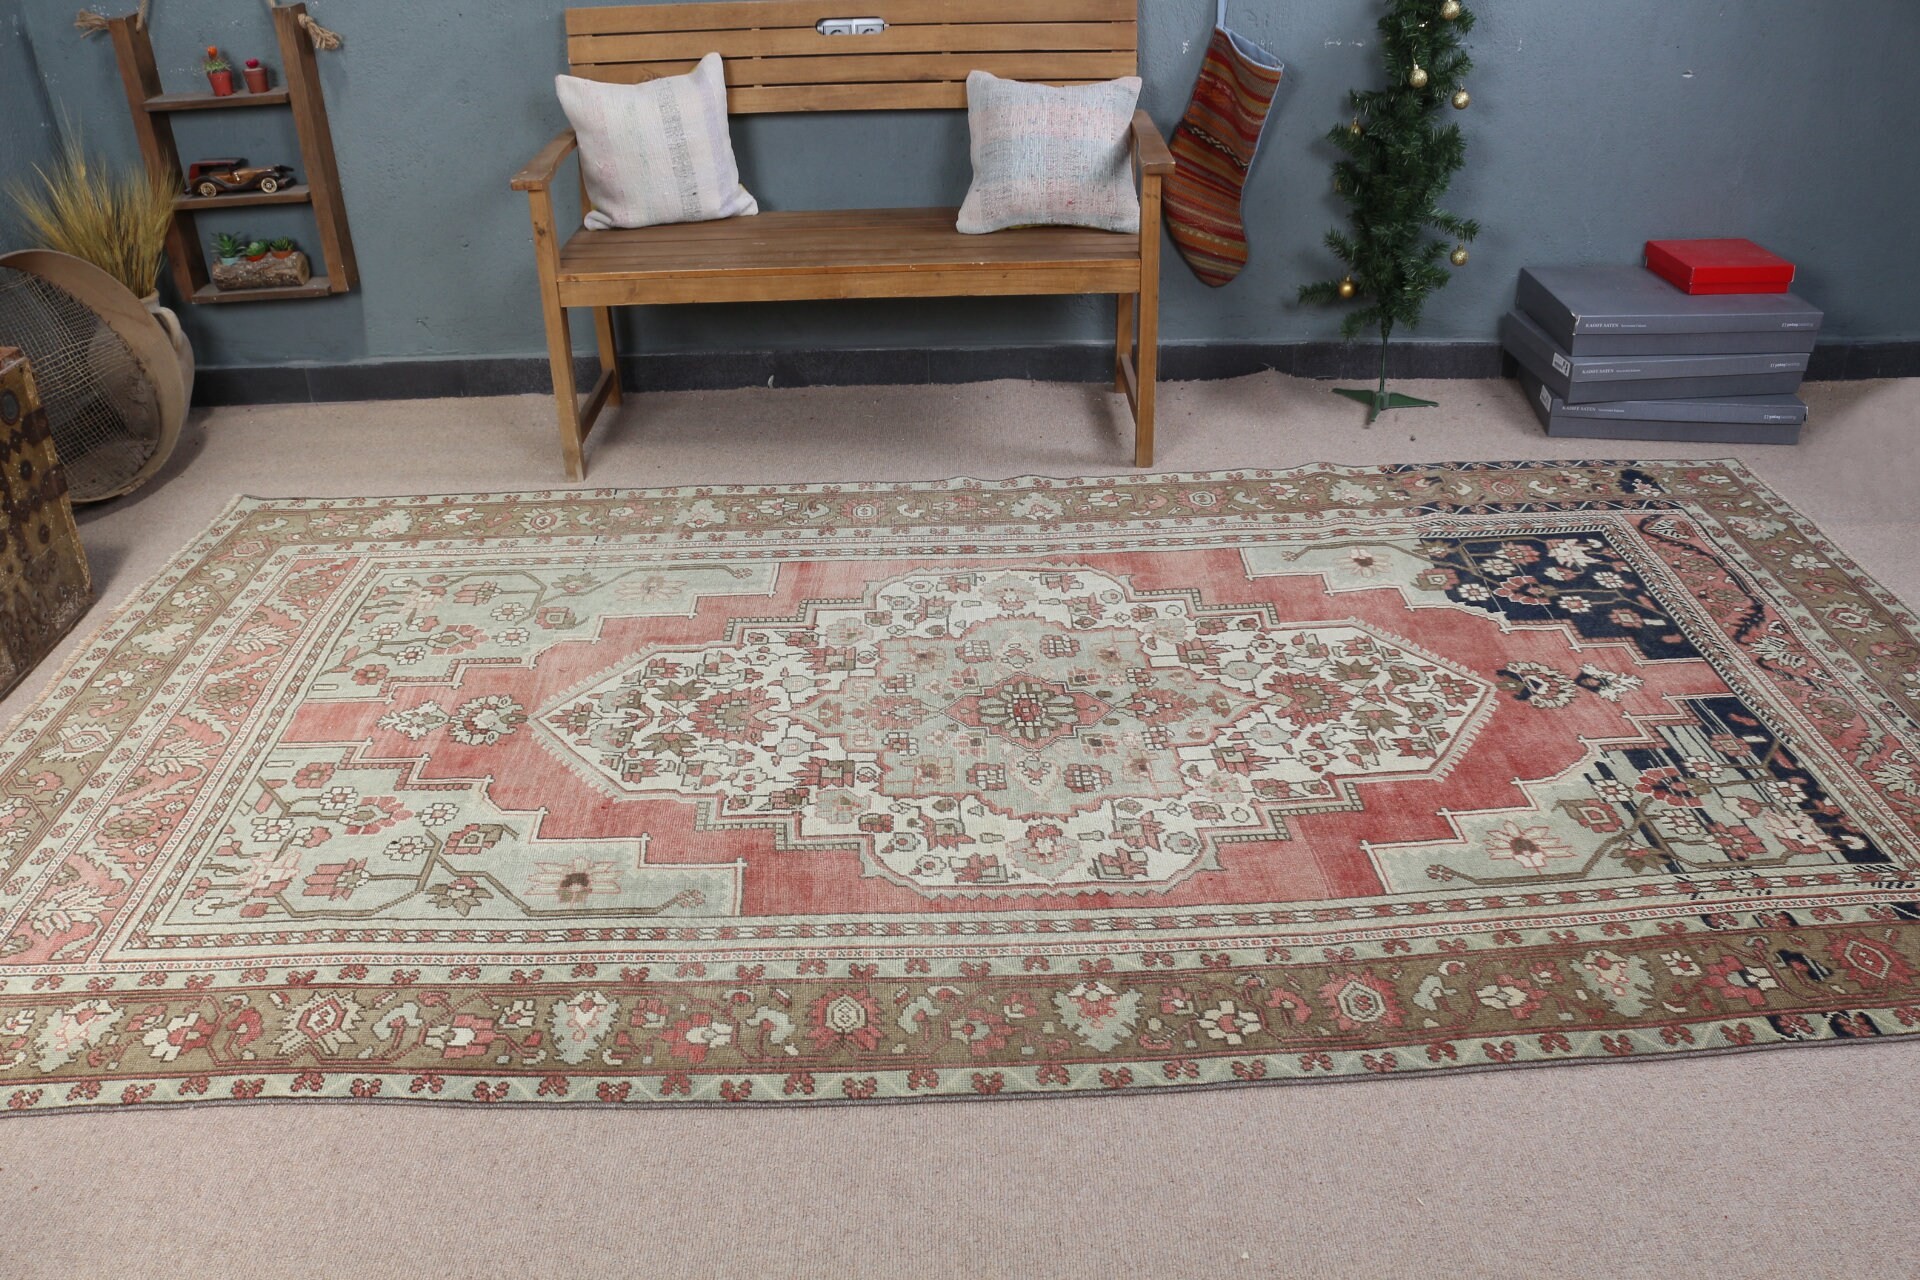 Vintage Rug, Anatolian Rugs, Bedroom Rug, Rugs for Dining Room, 5.8x10.6 ft Large Rug, Turkish Rugs, Dining Room Rug, Red Kitchen Rug